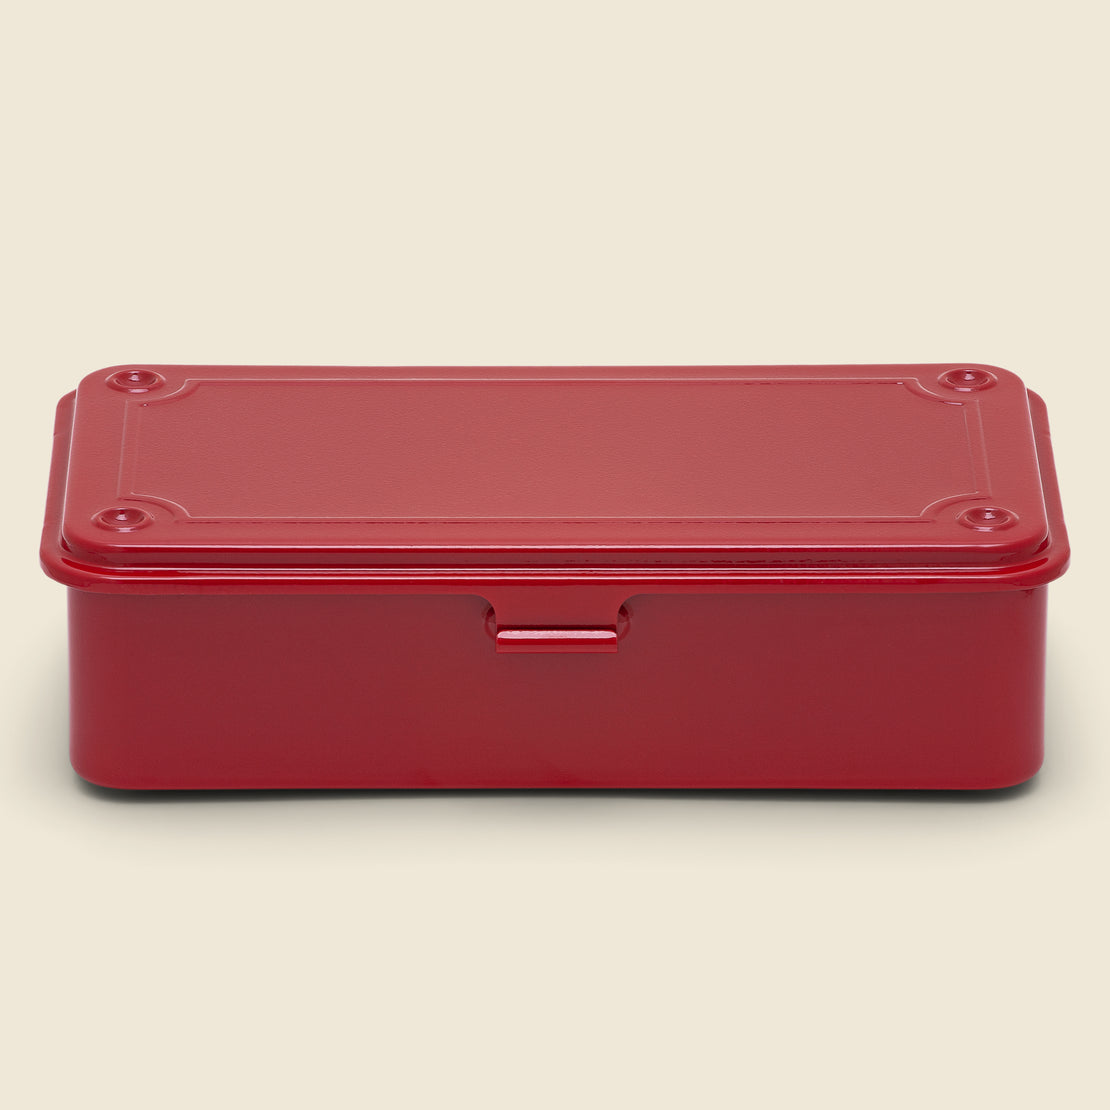 Home Stackable Storage Box - Red